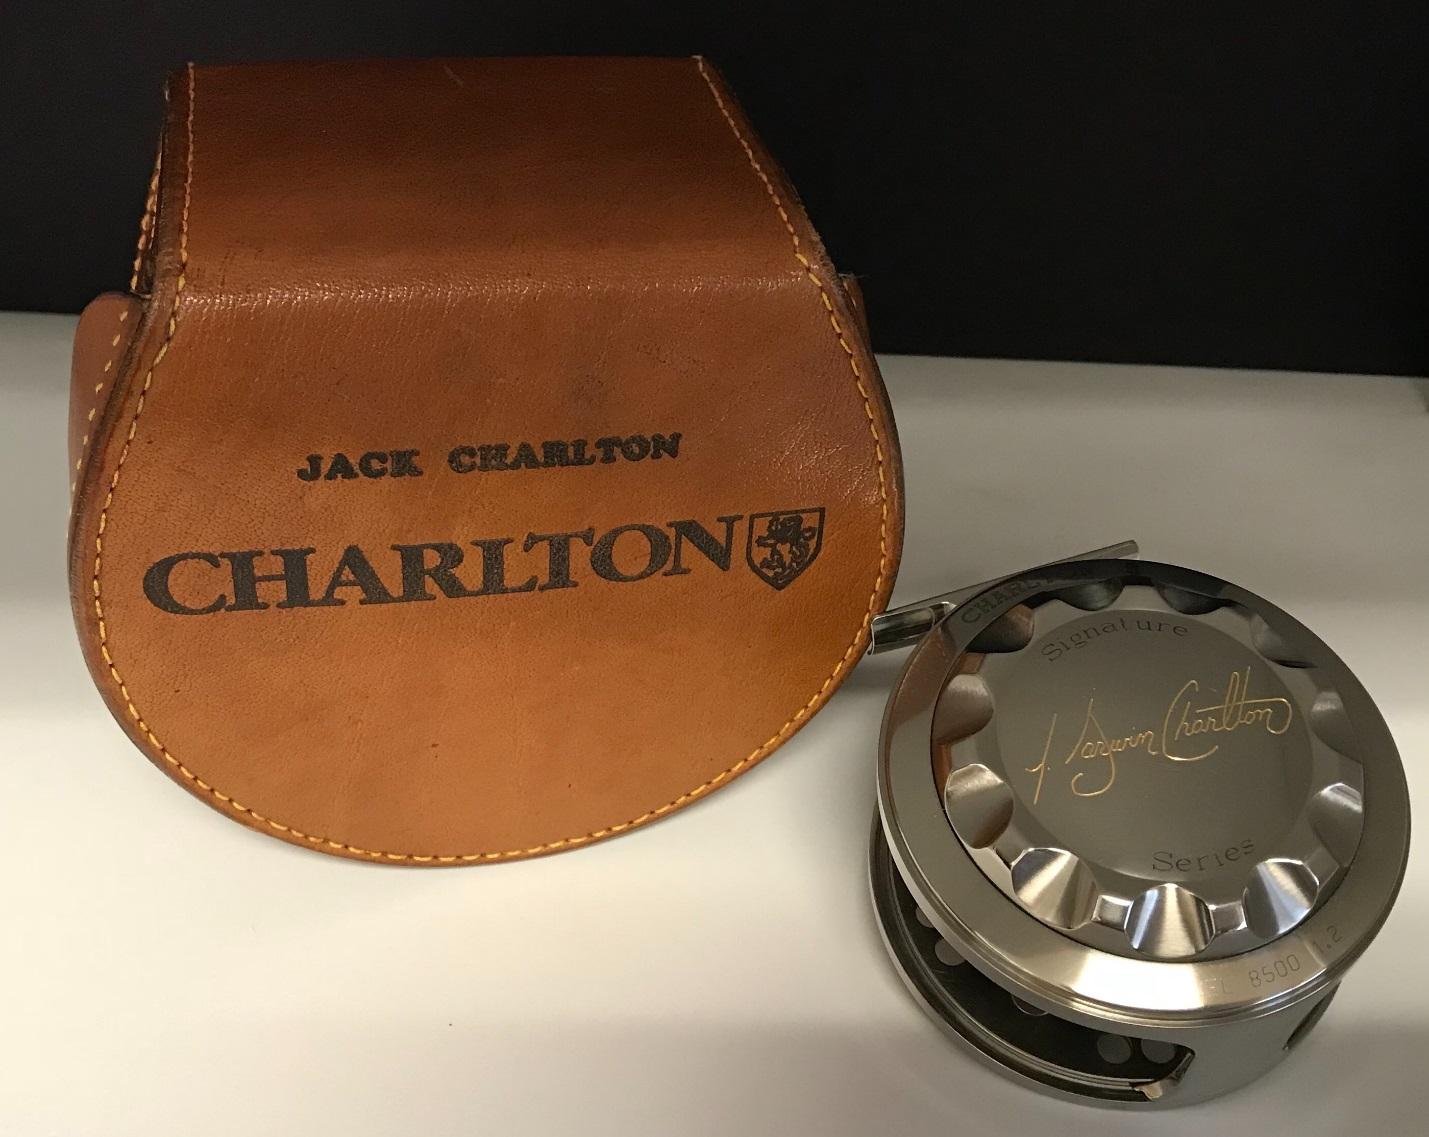 Collectible Charlton Reels - The Angling Company